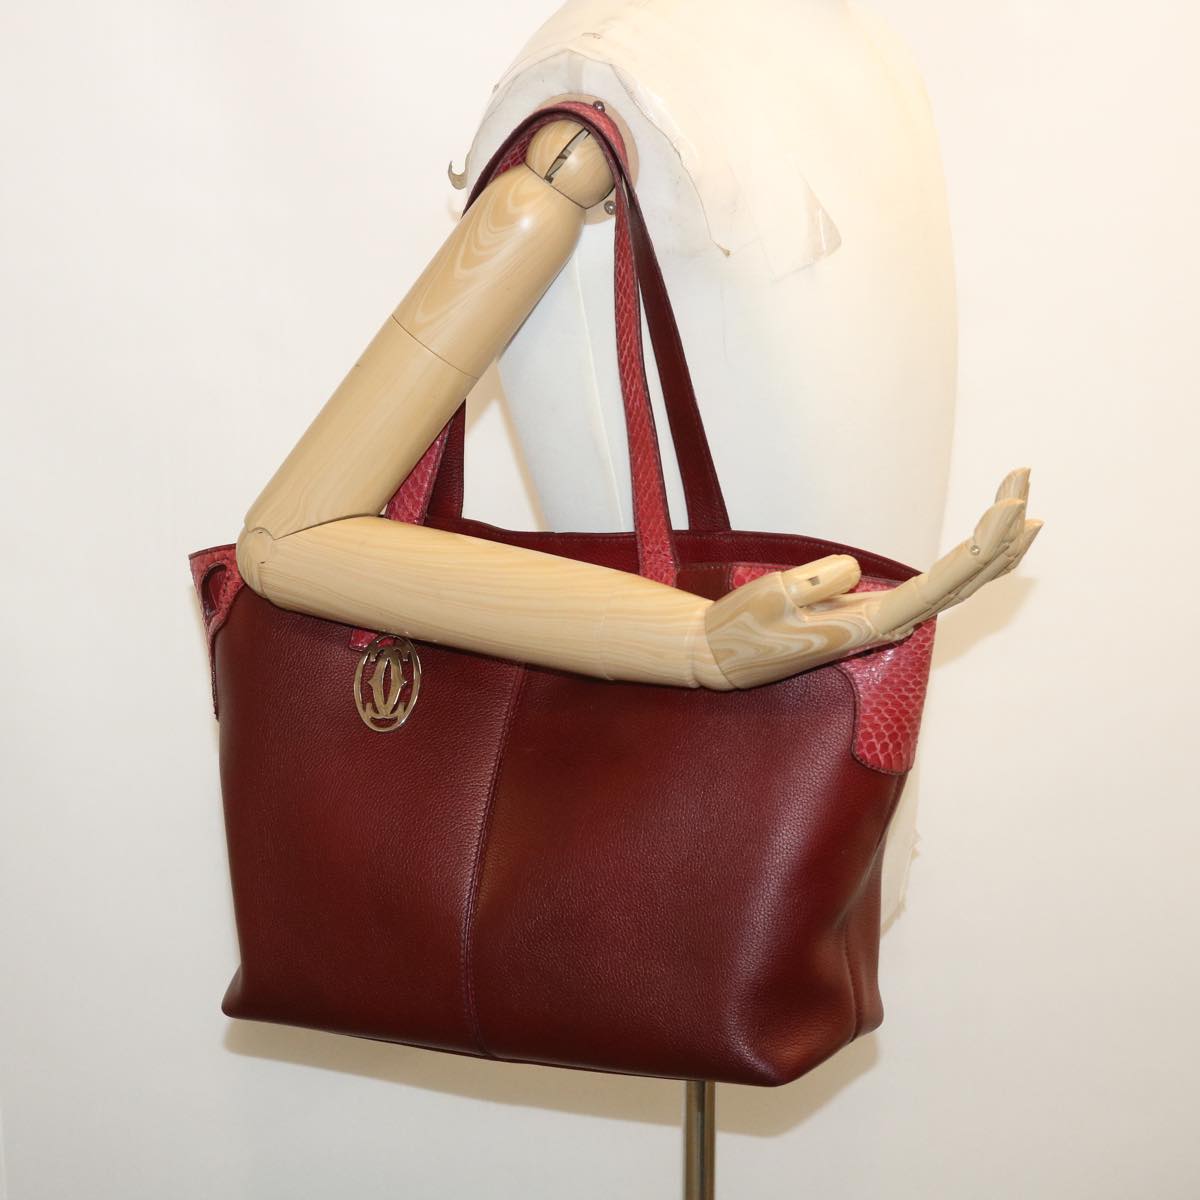 CARTIER Shoulder Bag Leather Red Auth 29820A